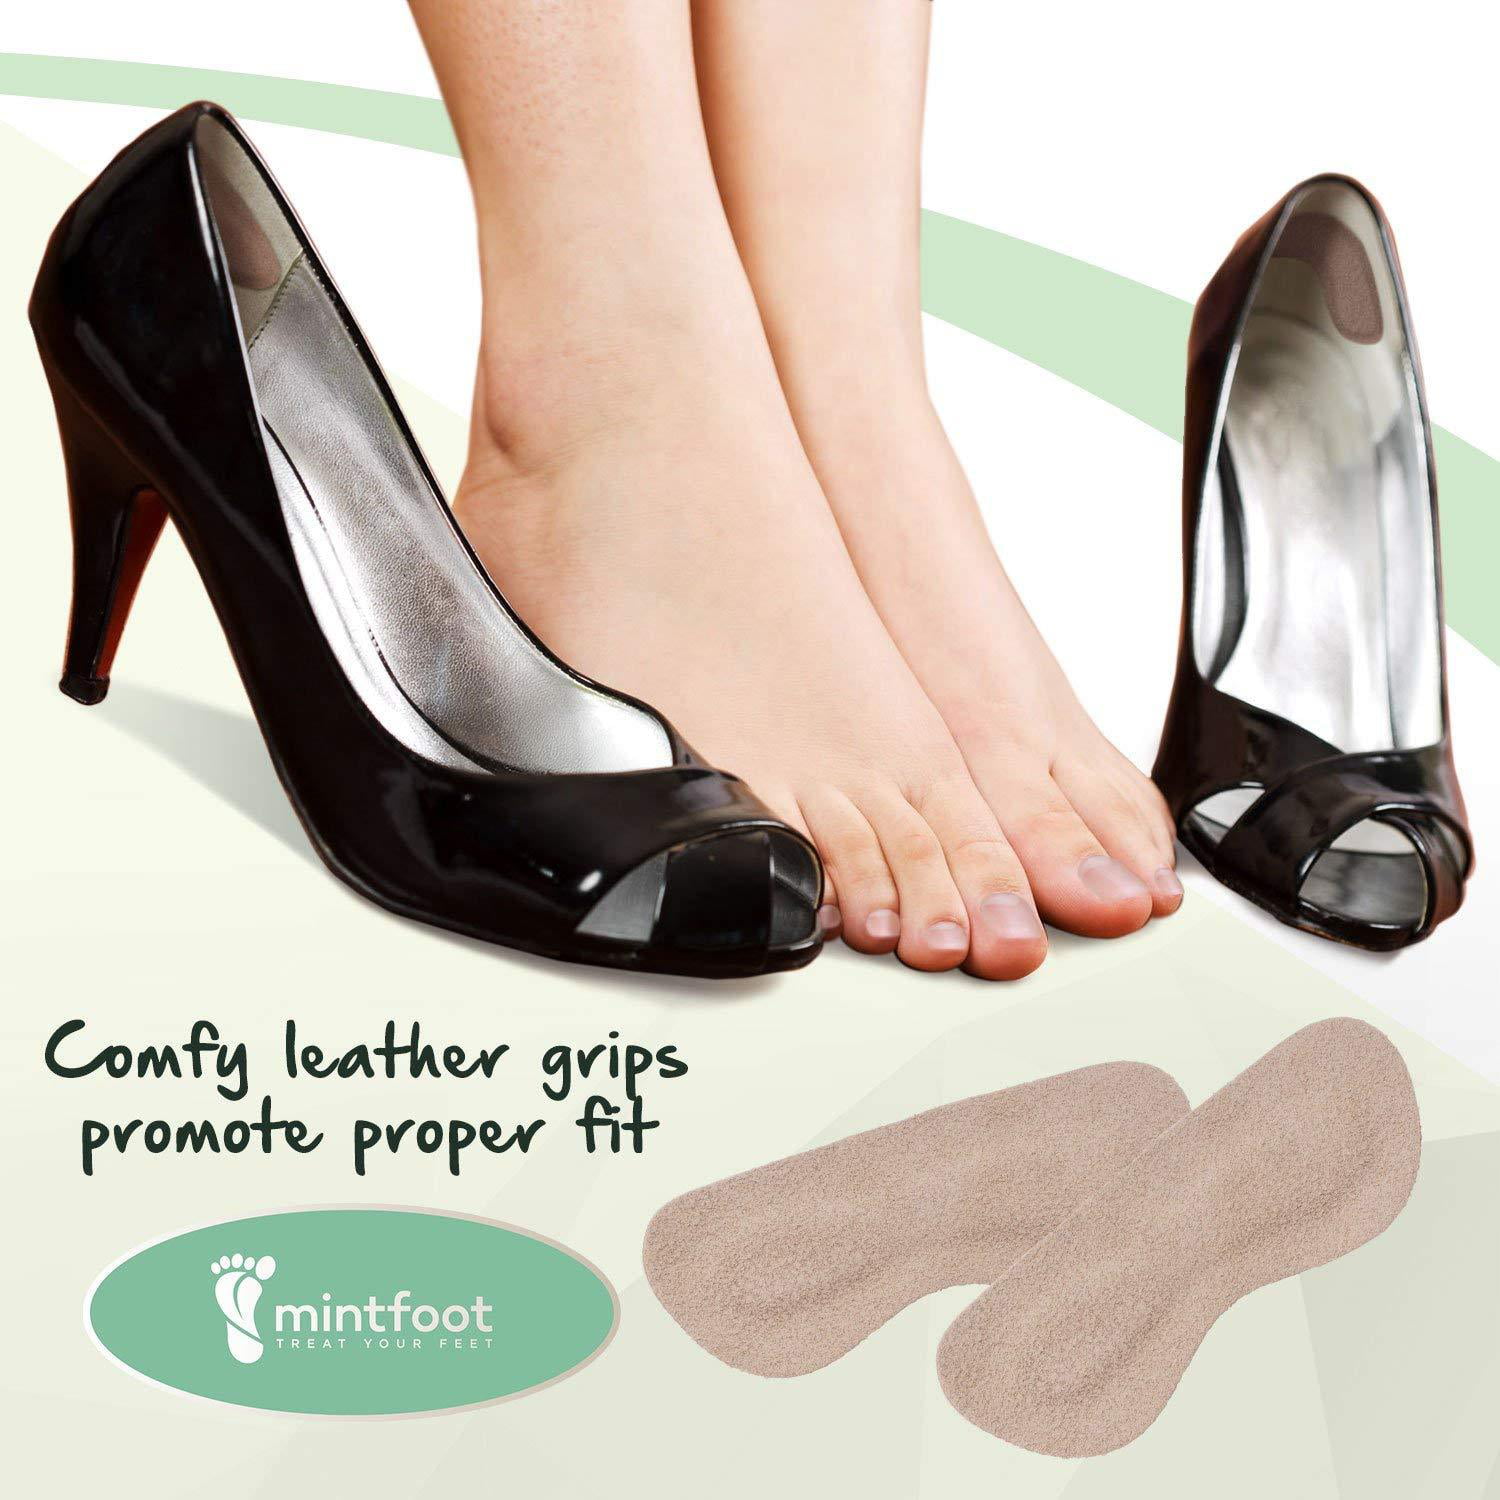 PEDIMEND™ Leather High Heel Grips Liners Cushions | Heel Protector Pad |  Prevent Blisters & Shoe Rubbing | Heel Snugs Insoles for Shoes Too Big -  PEDIMEND